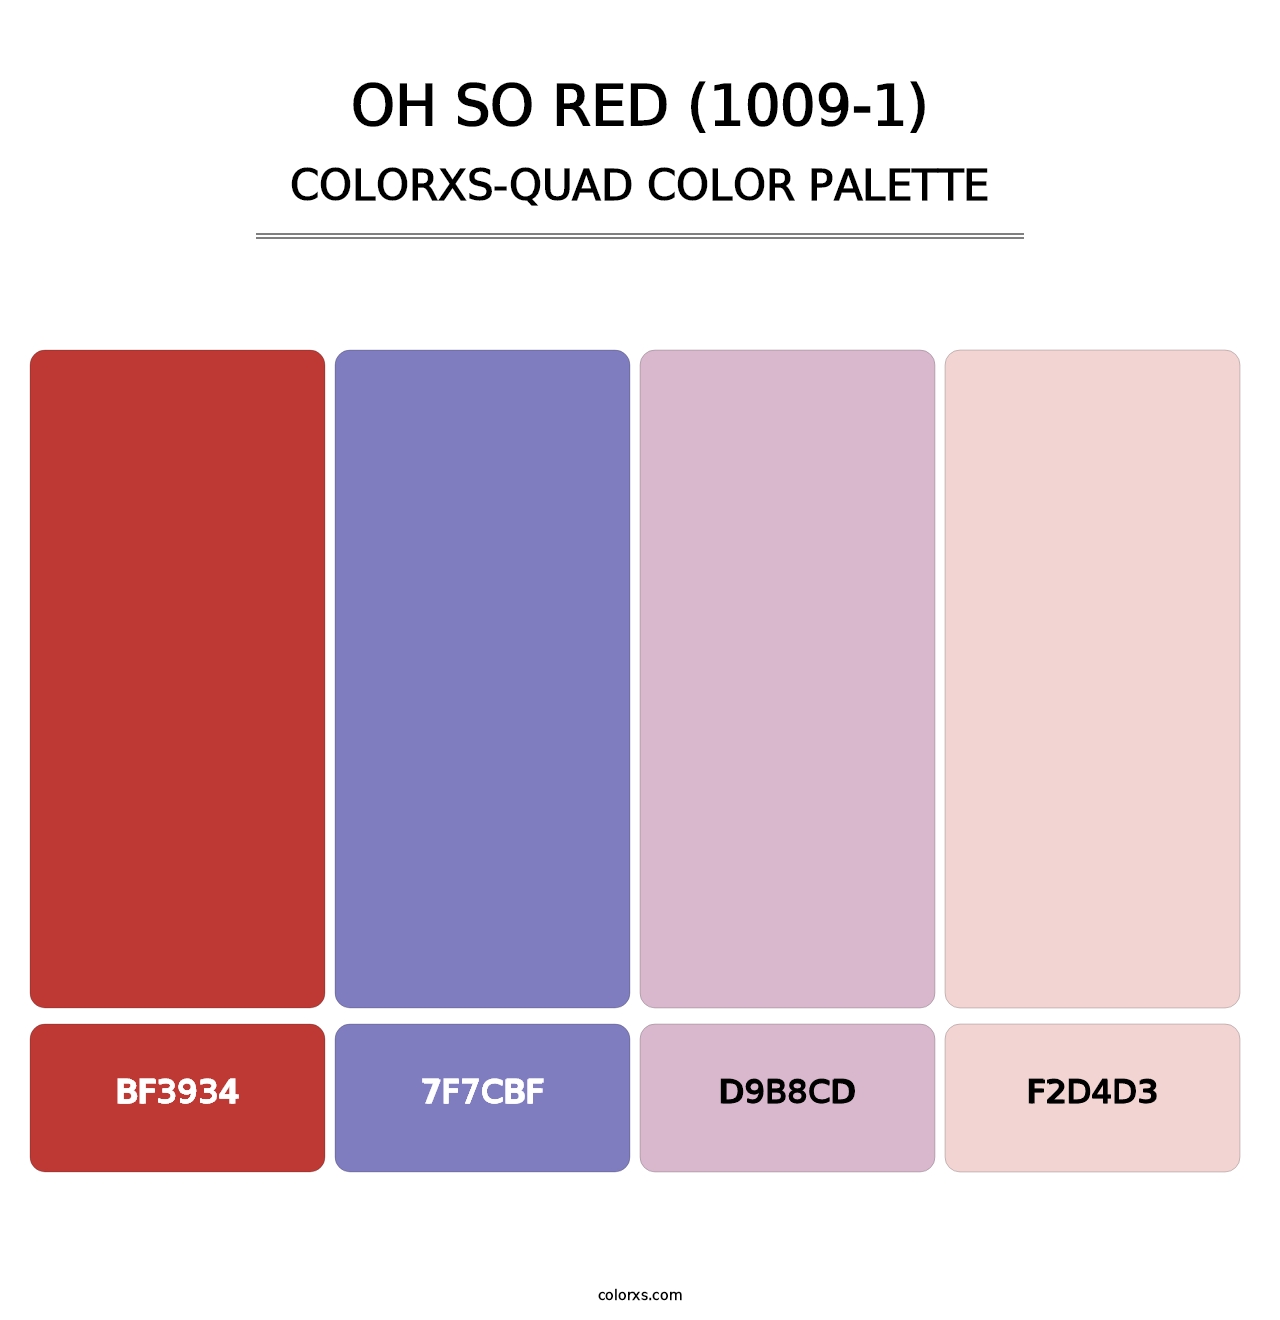 Oh So Red (1009-1) - Colorxs Quad Palette